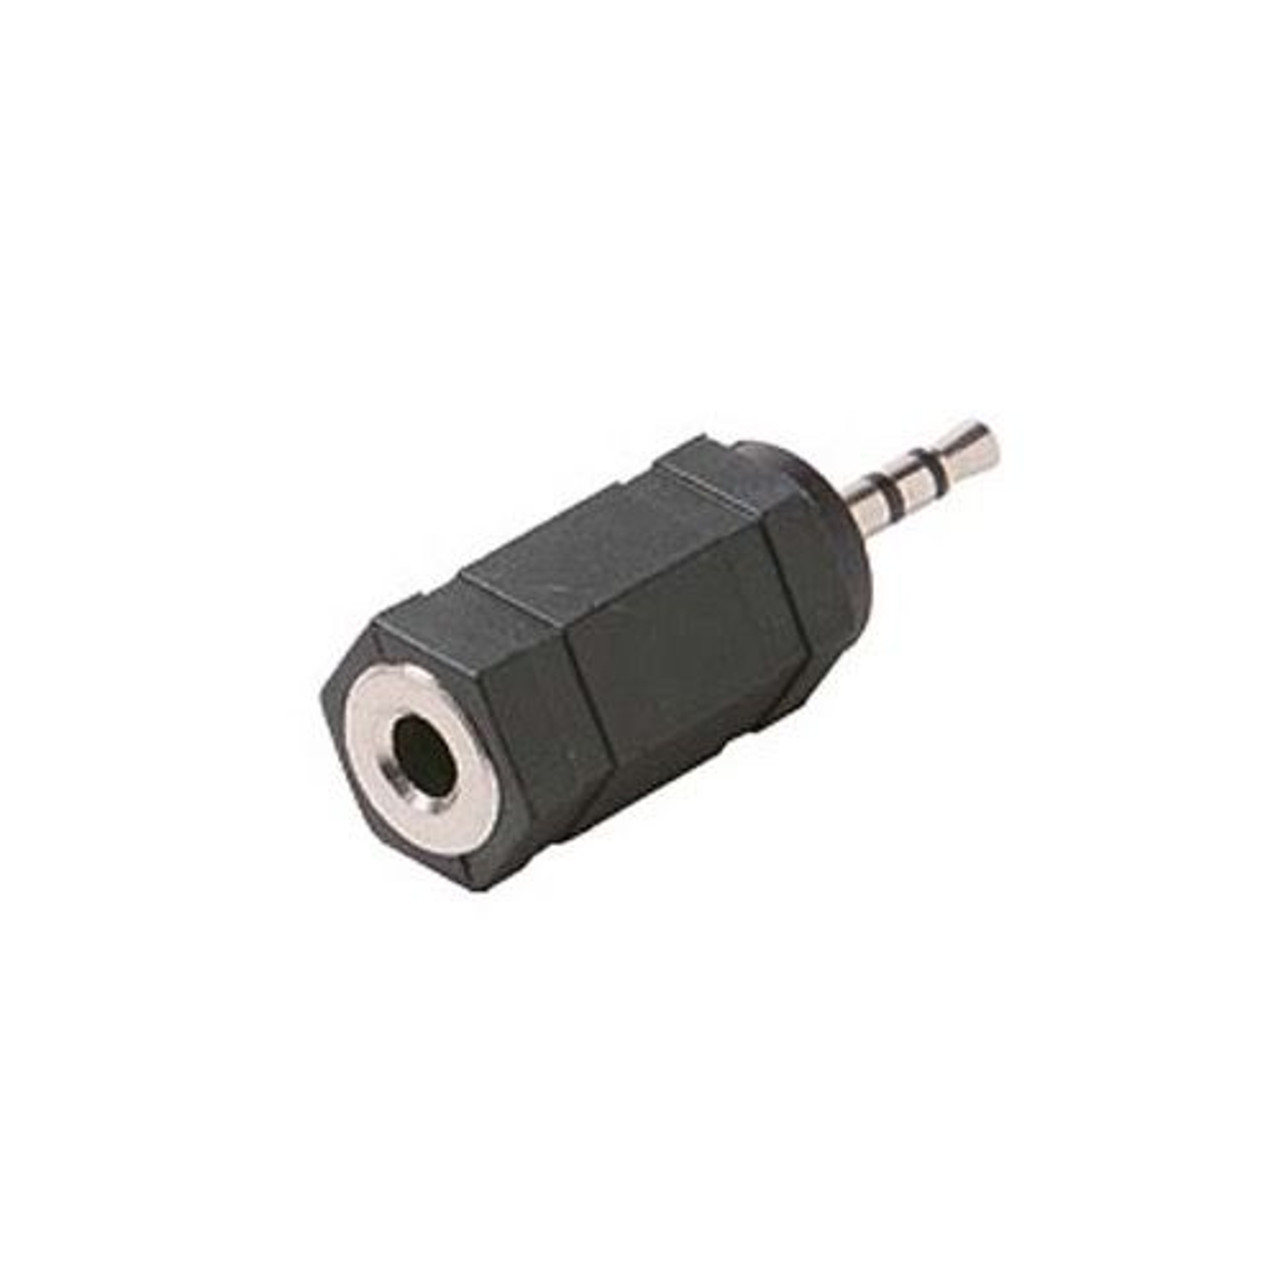 Steren 251-002 2.5mm Male to 3.5mm Female Adapter Stereo 3.5 mm Female to 2.5 mm Male Stereo Headphone Audio Jack Signal MP3 Plug Connector, Part # 251002